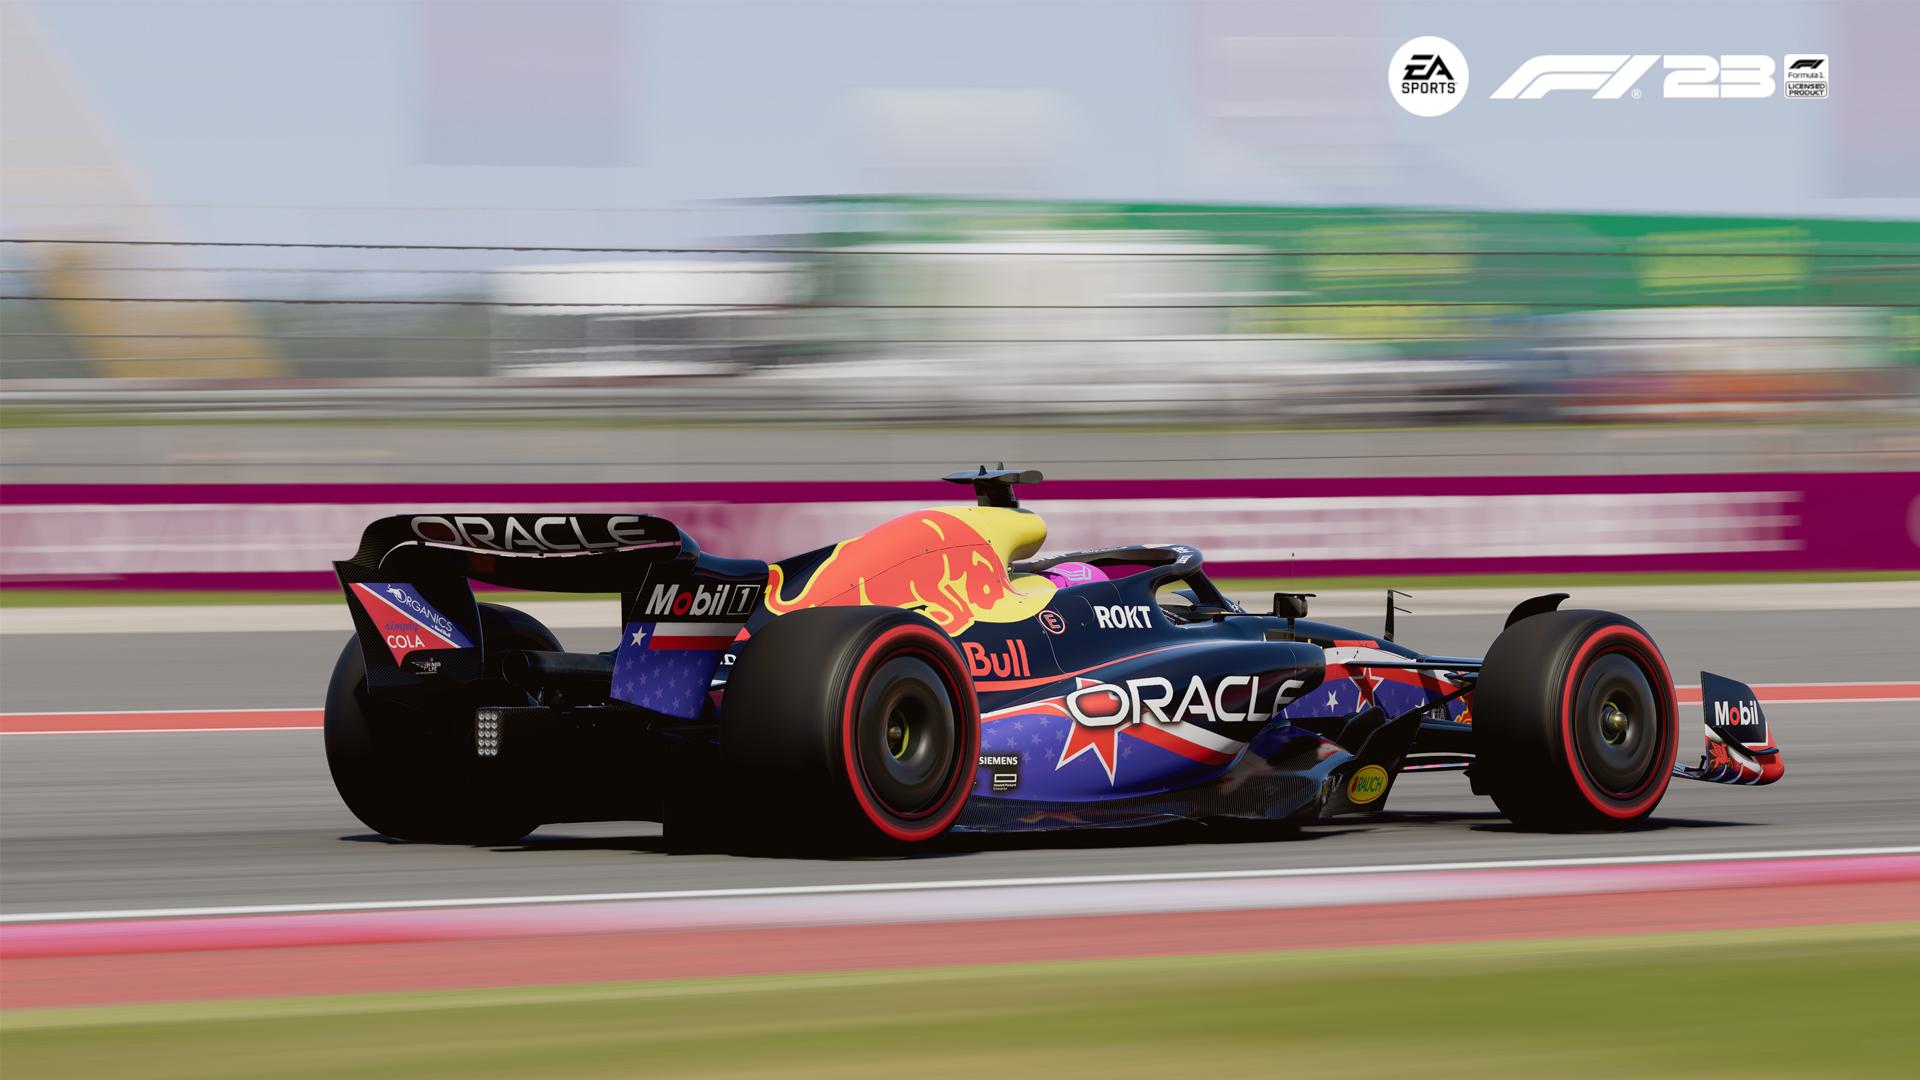 Red Bull's biggest 2023 F1 car design change explained - The Race